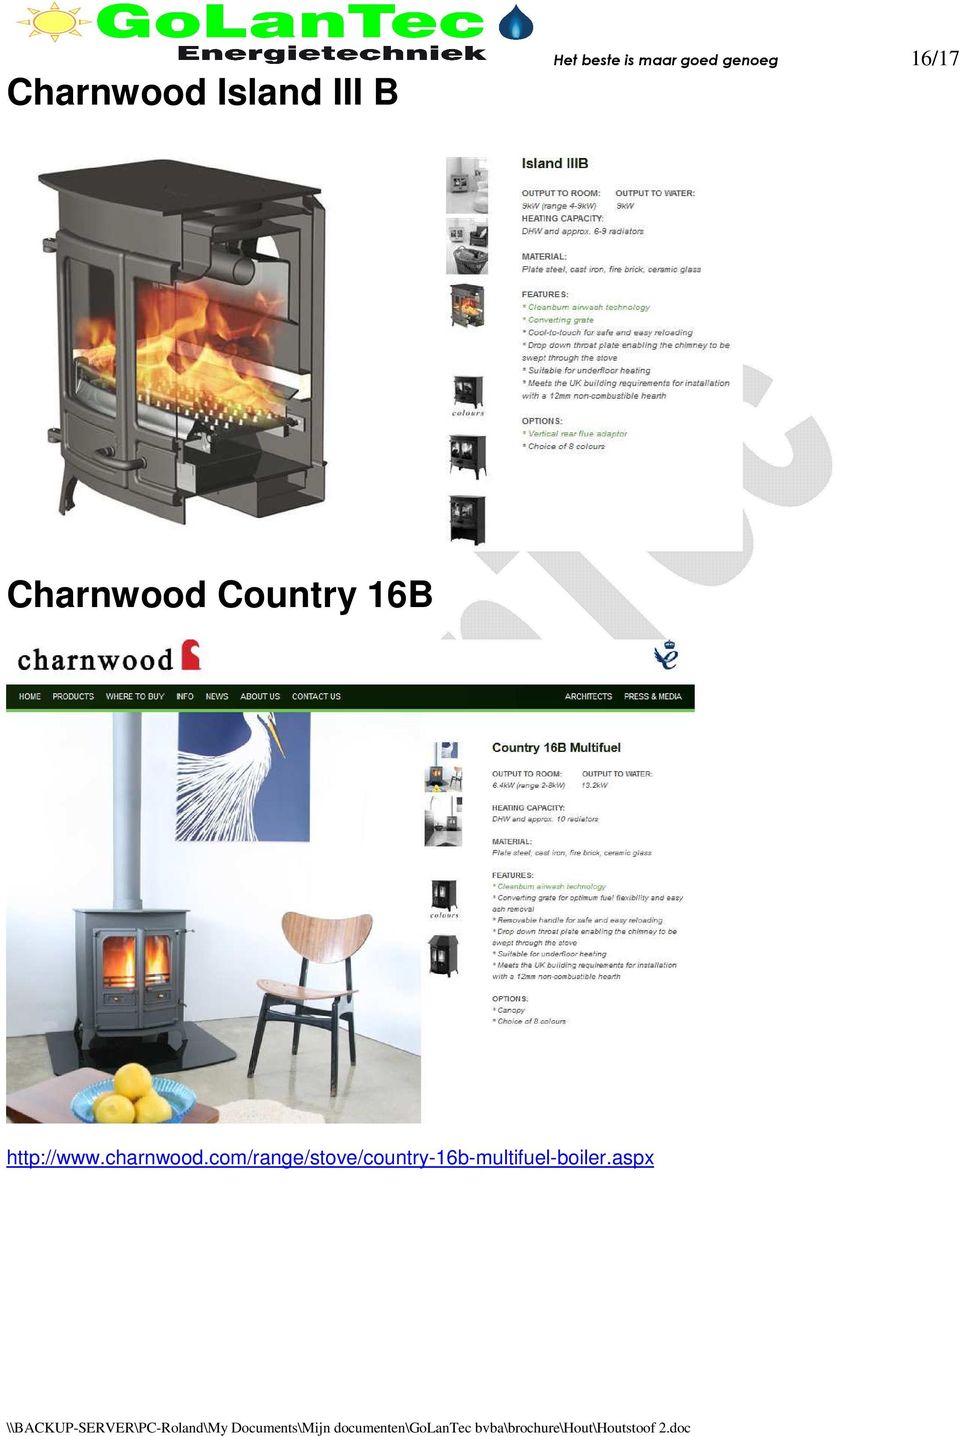 Country 16B http://www.charnwood.